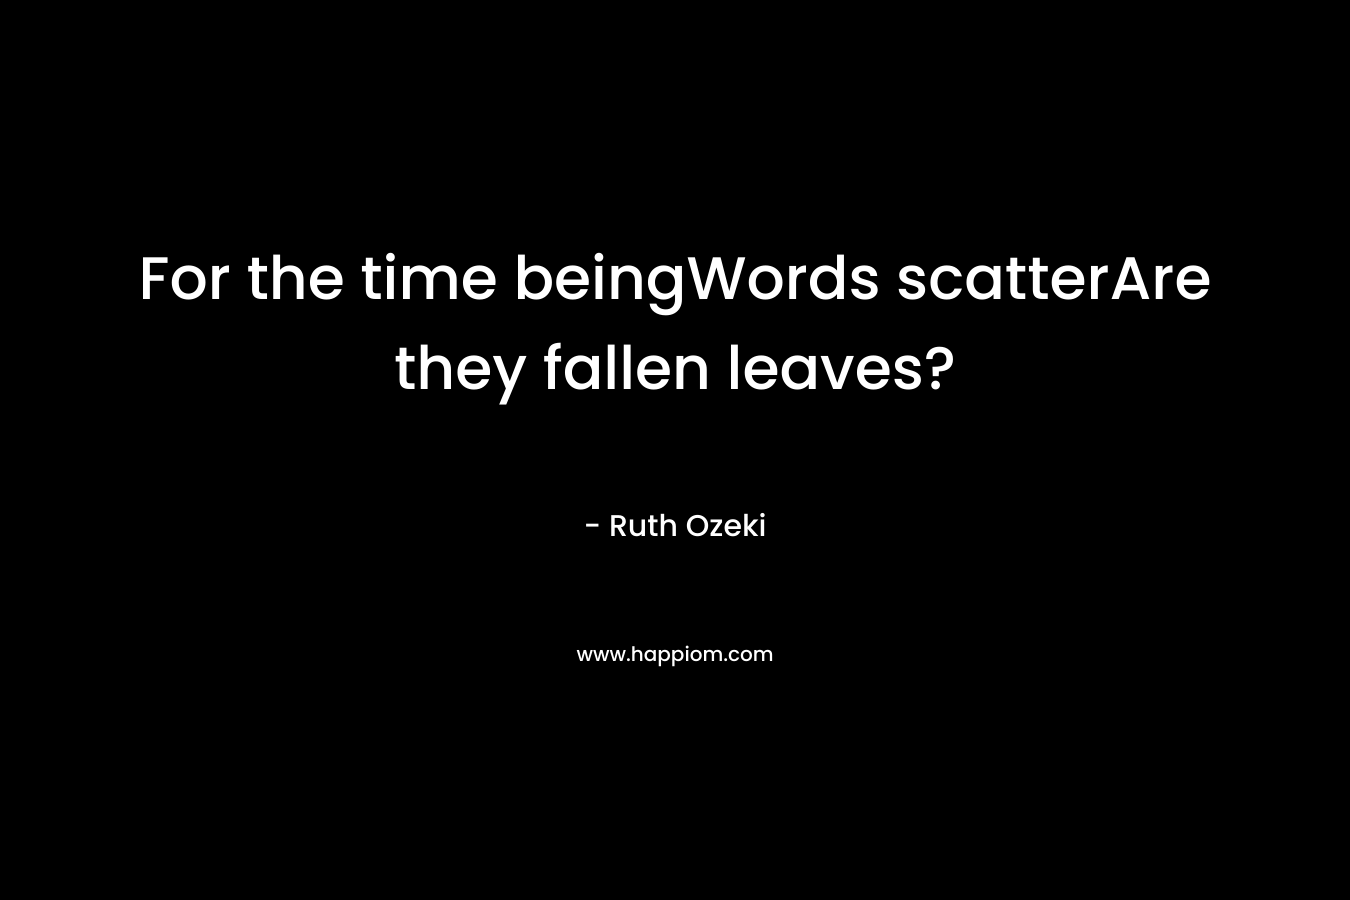 For the time beingWords scatterAre they fallen leaves?